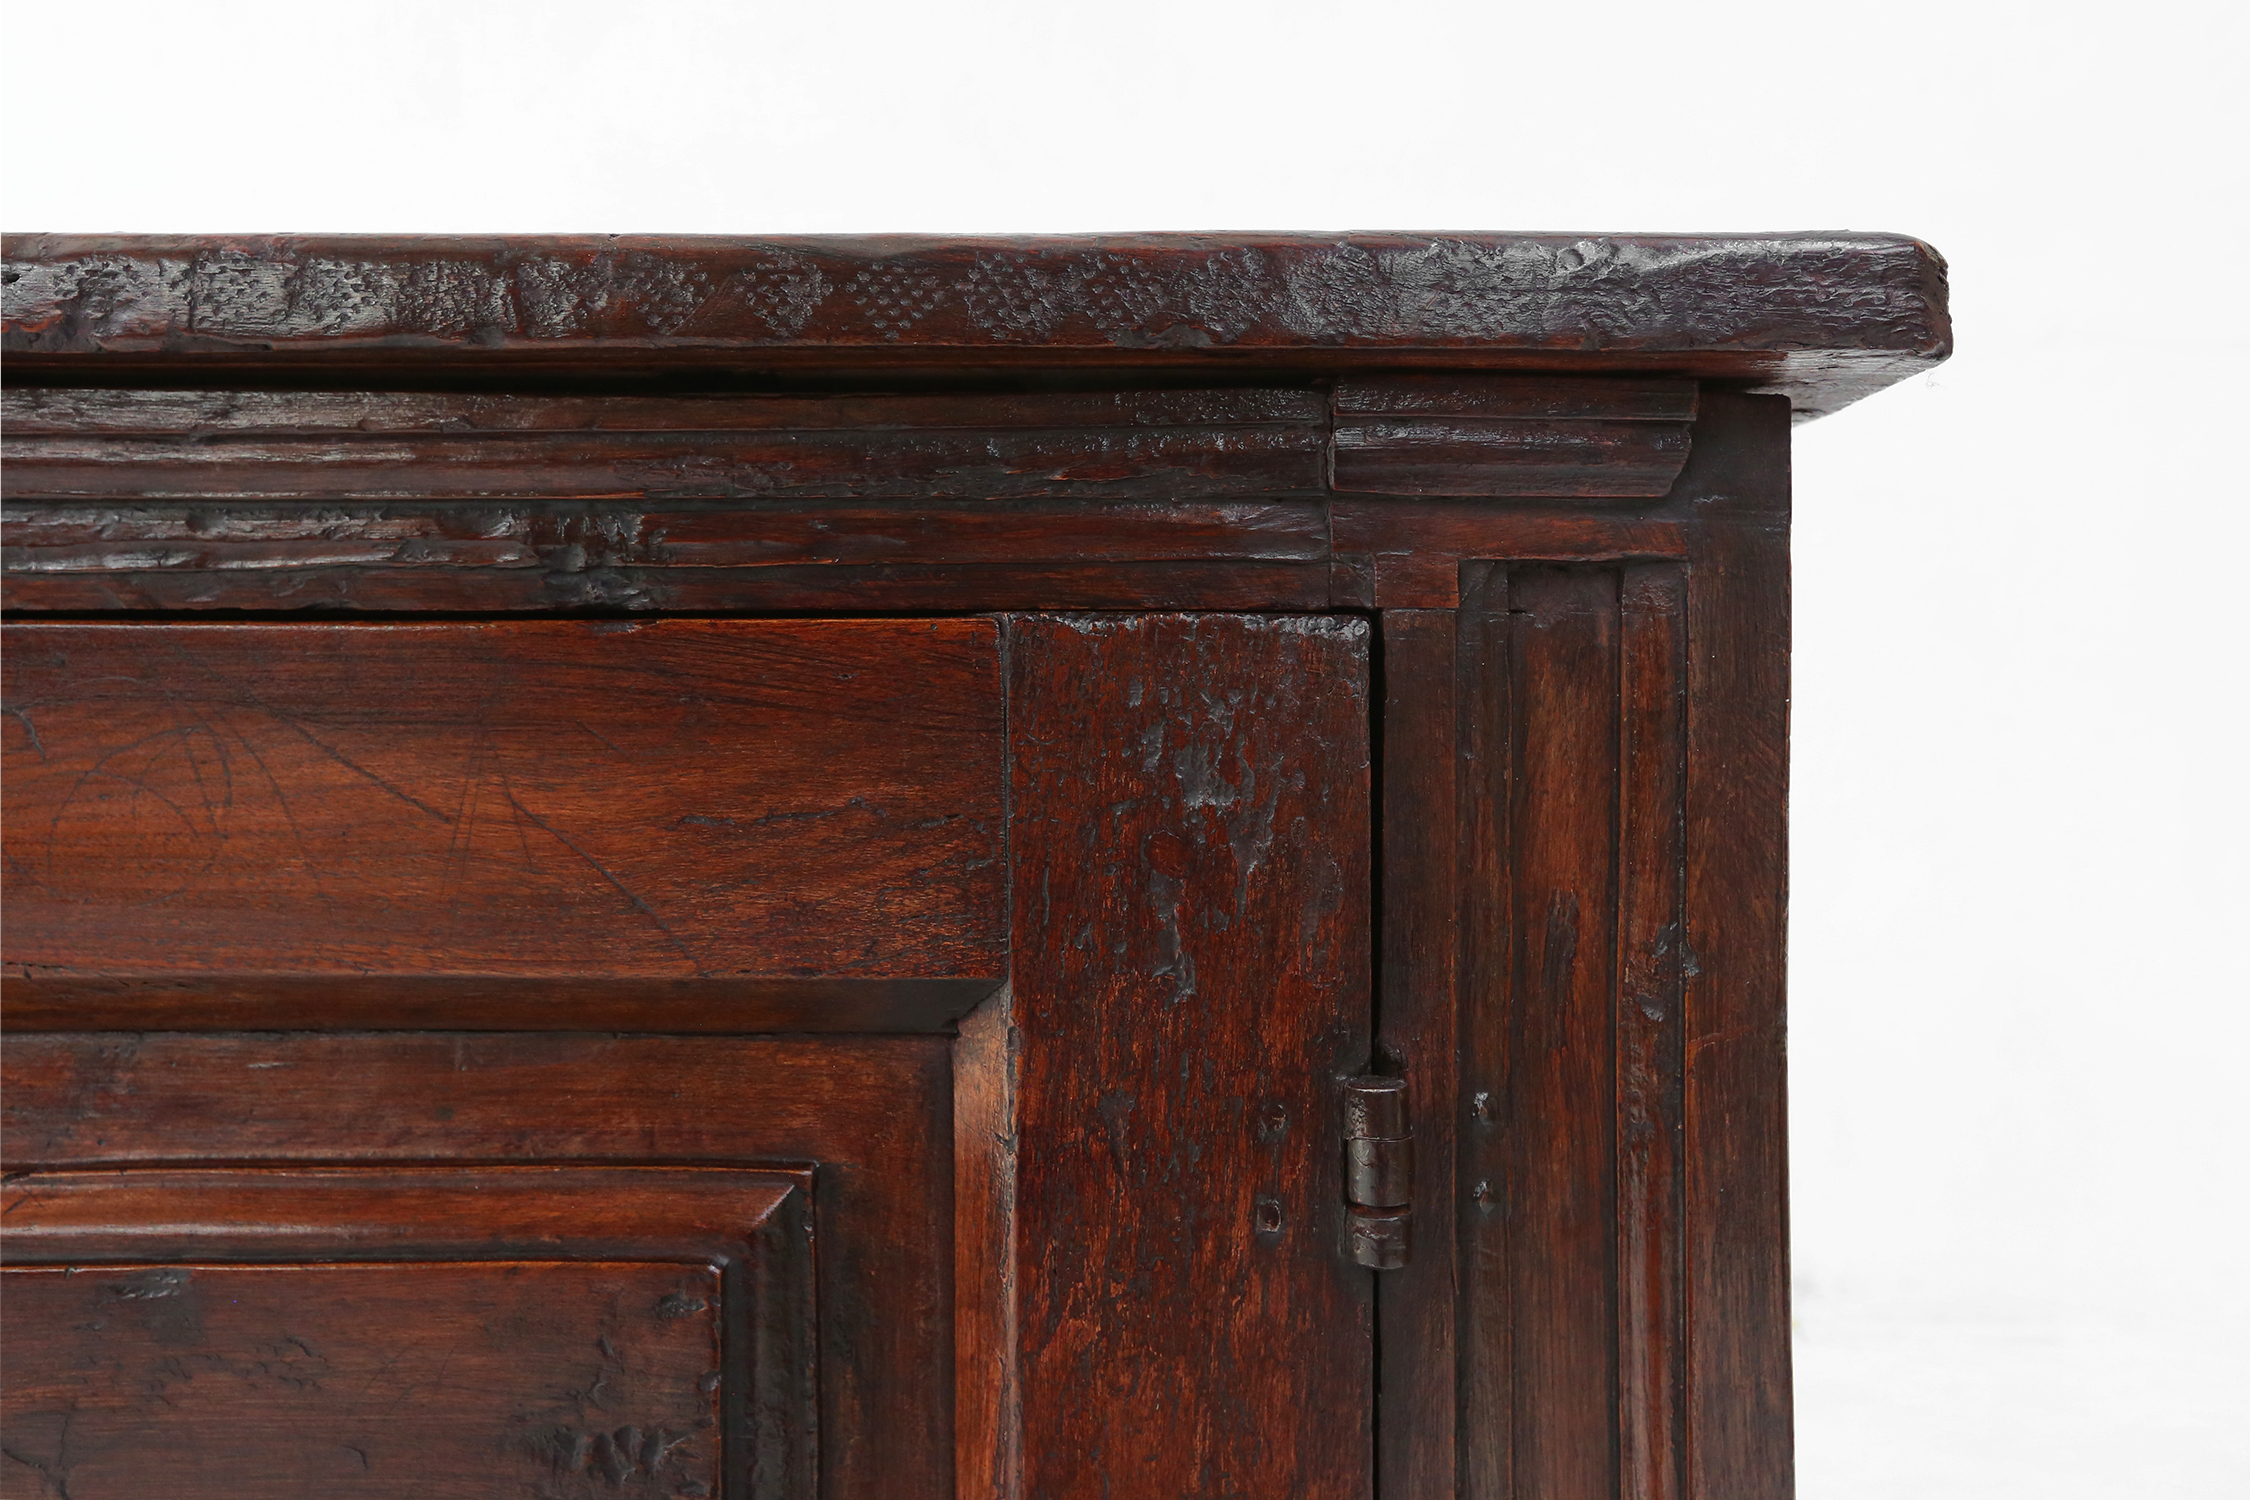 Unique 16th century French geometric sideboard in oakthumbnail